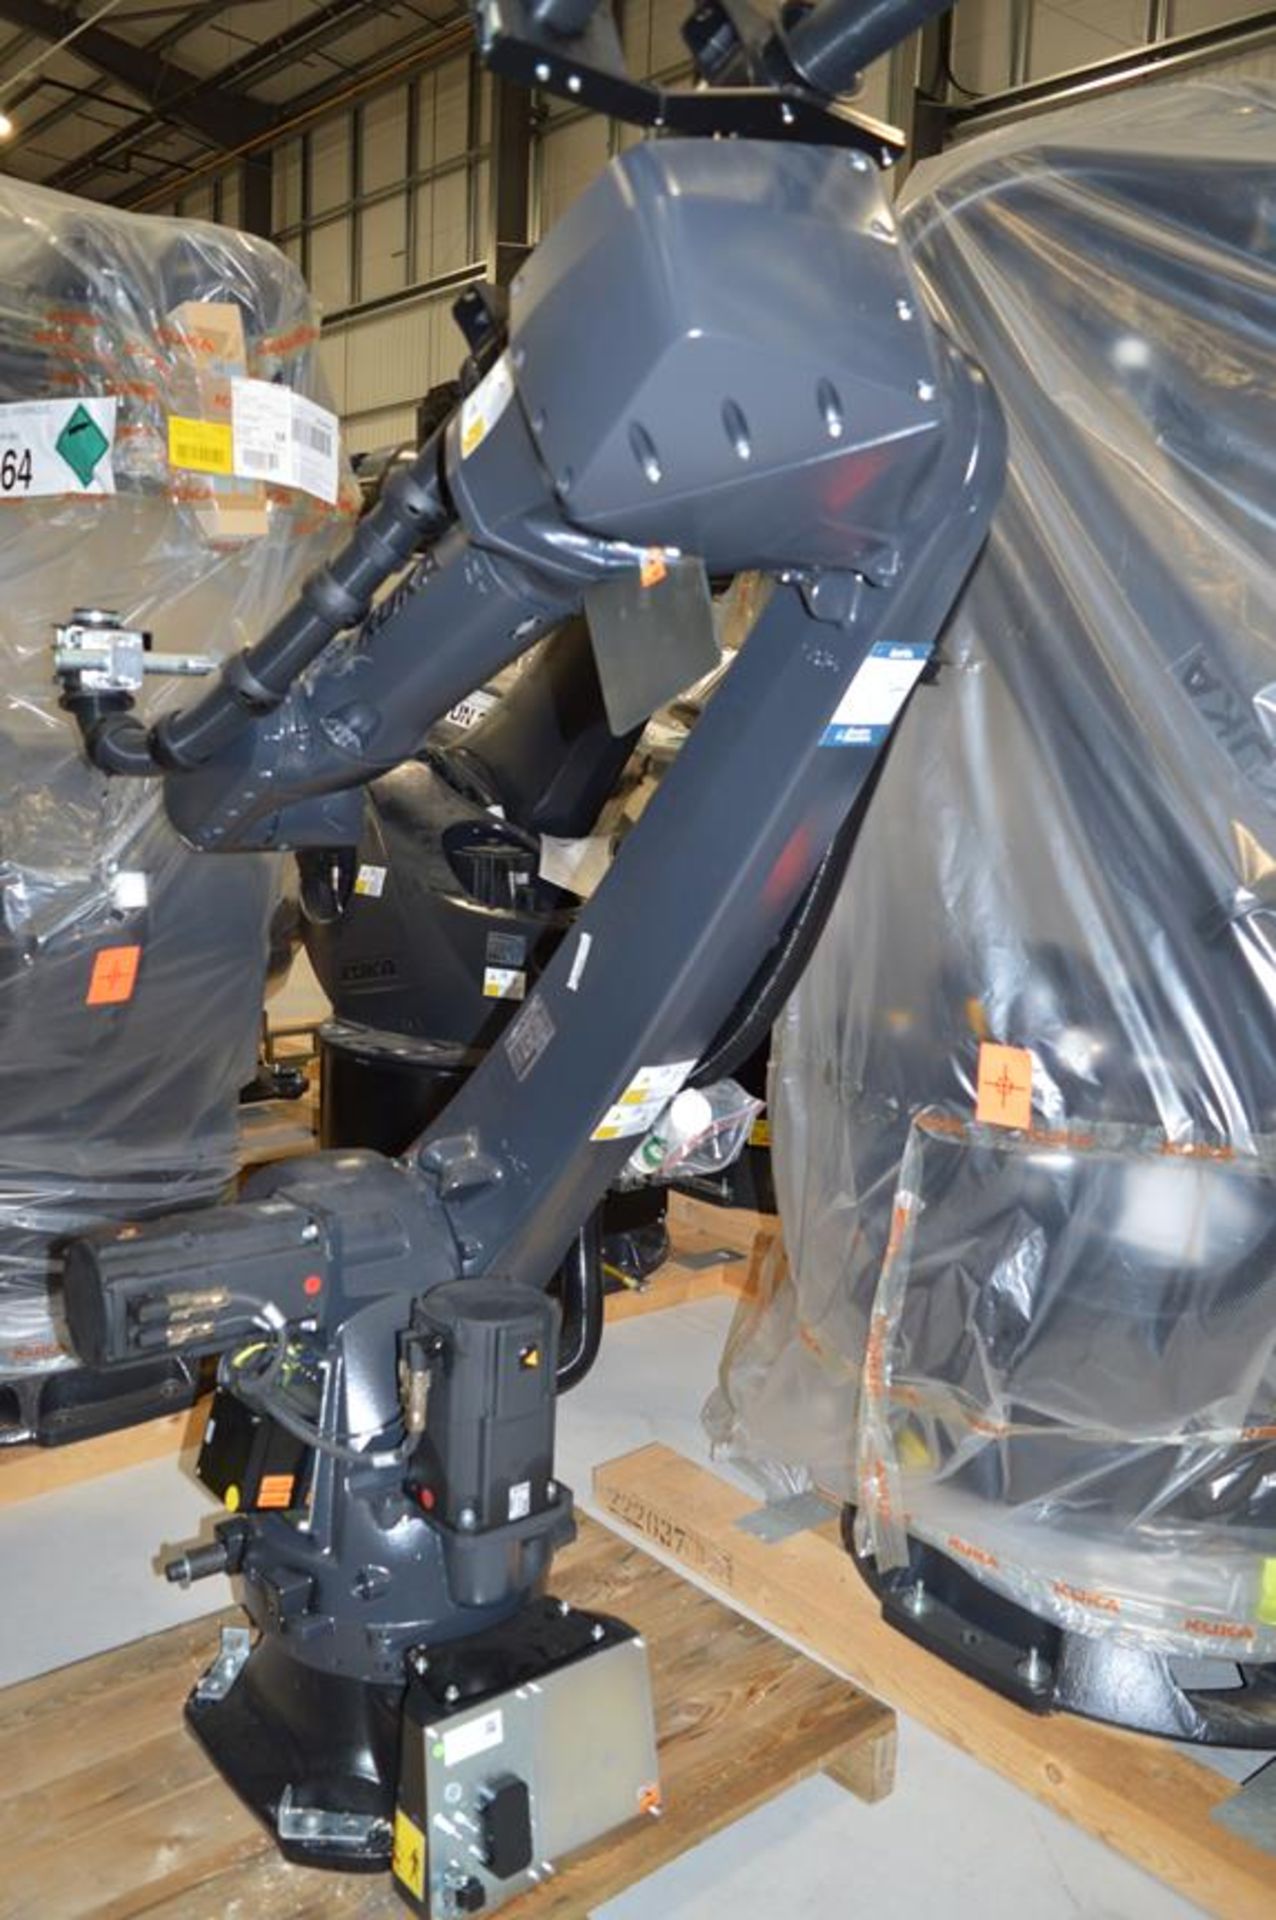 Kuka, KR50 R2500/SEL six axis robot, Serial No. 1422518 (DOM: 2022) with KRC4 controller with teach